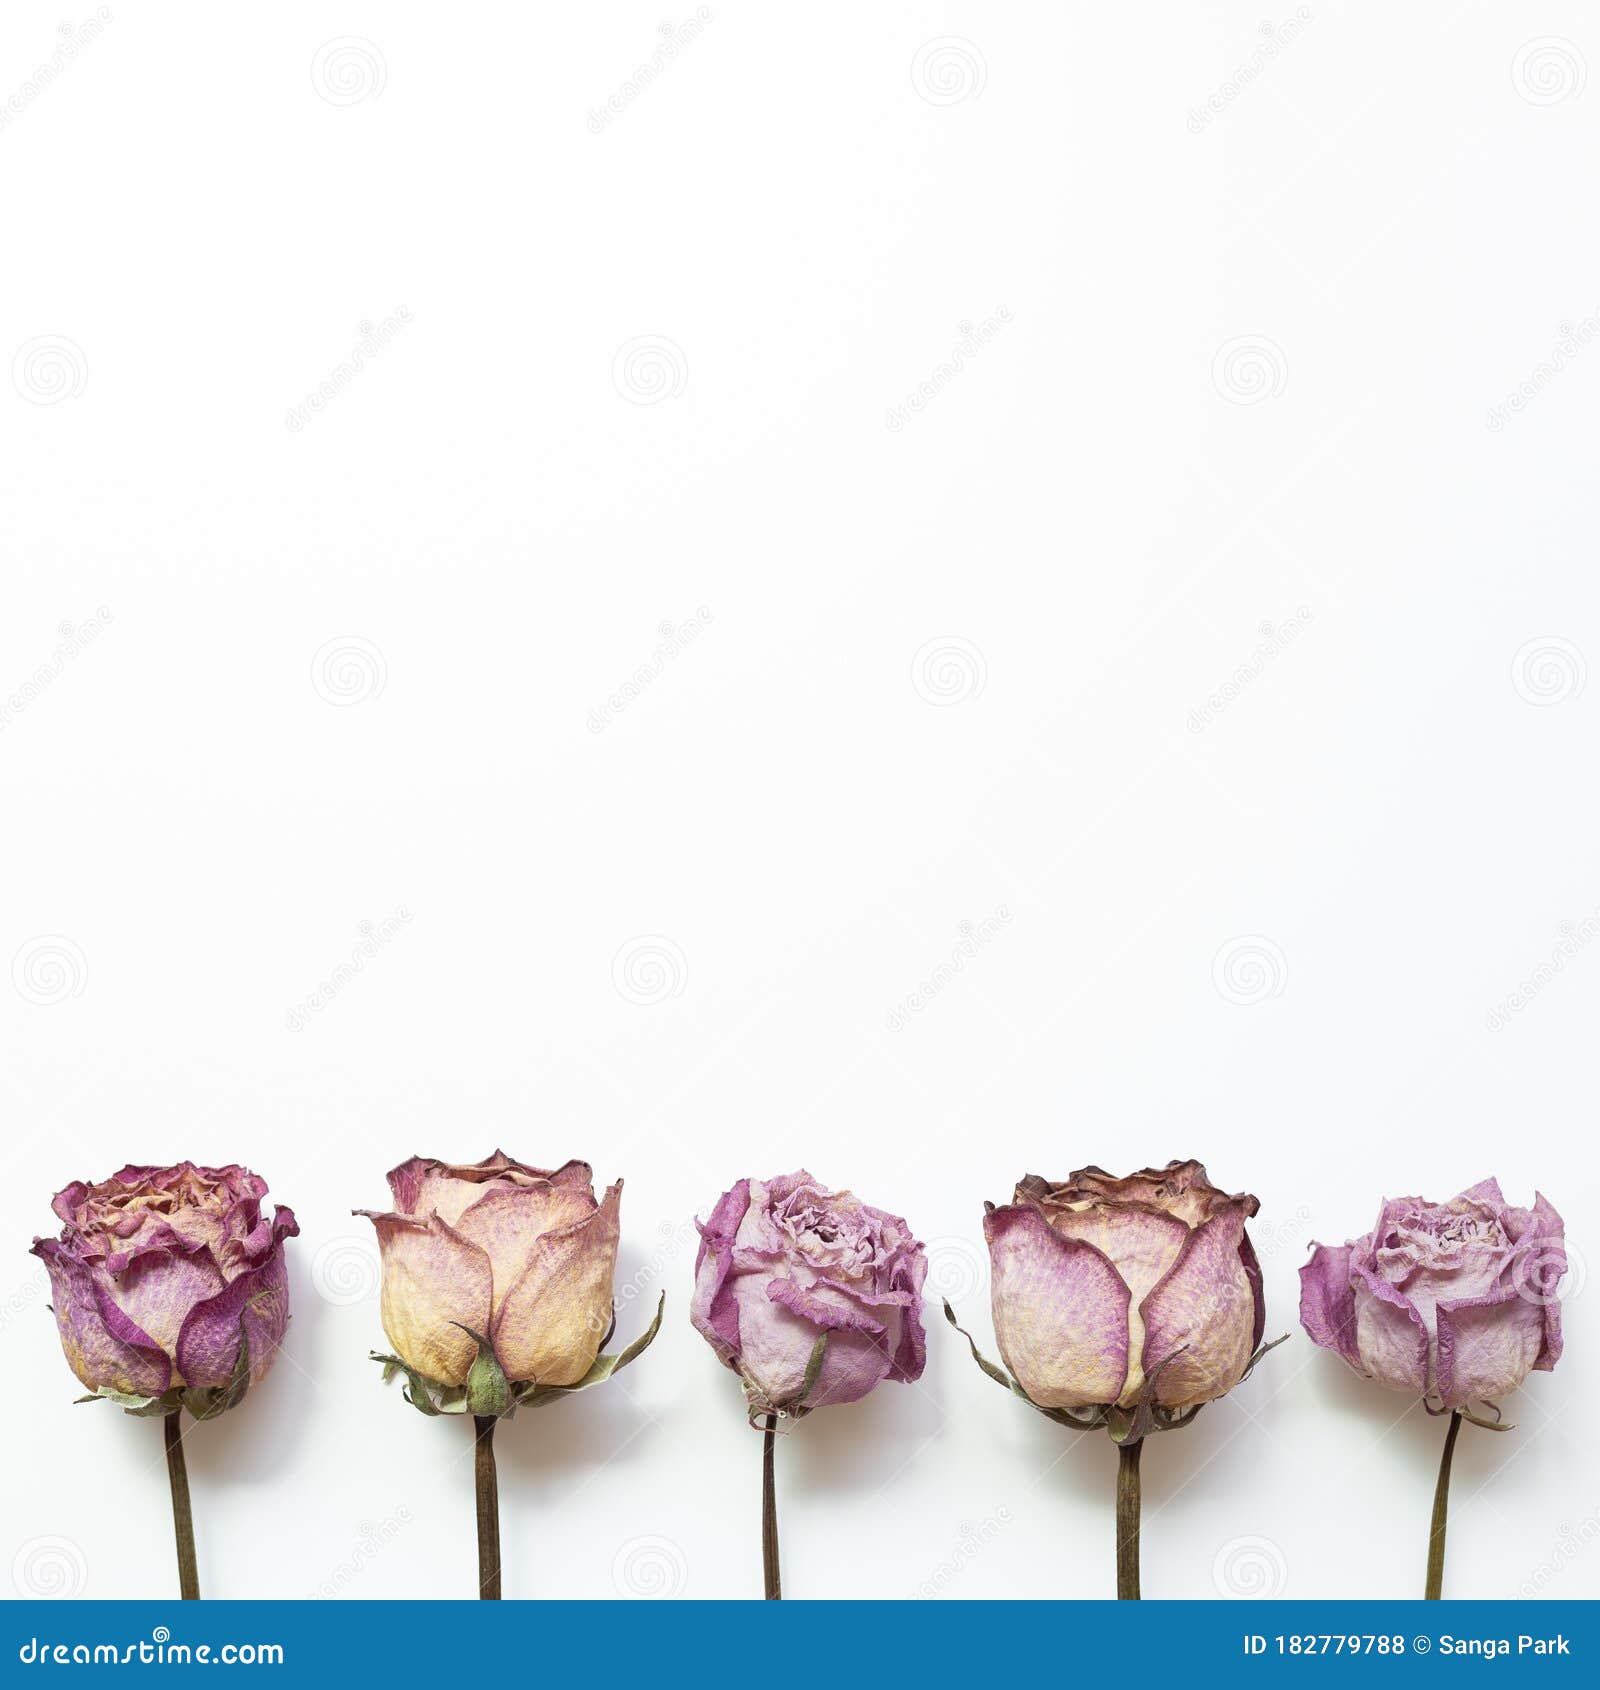 Dry Purple Rose Flowers on White Background Stock Photo - Image of ...